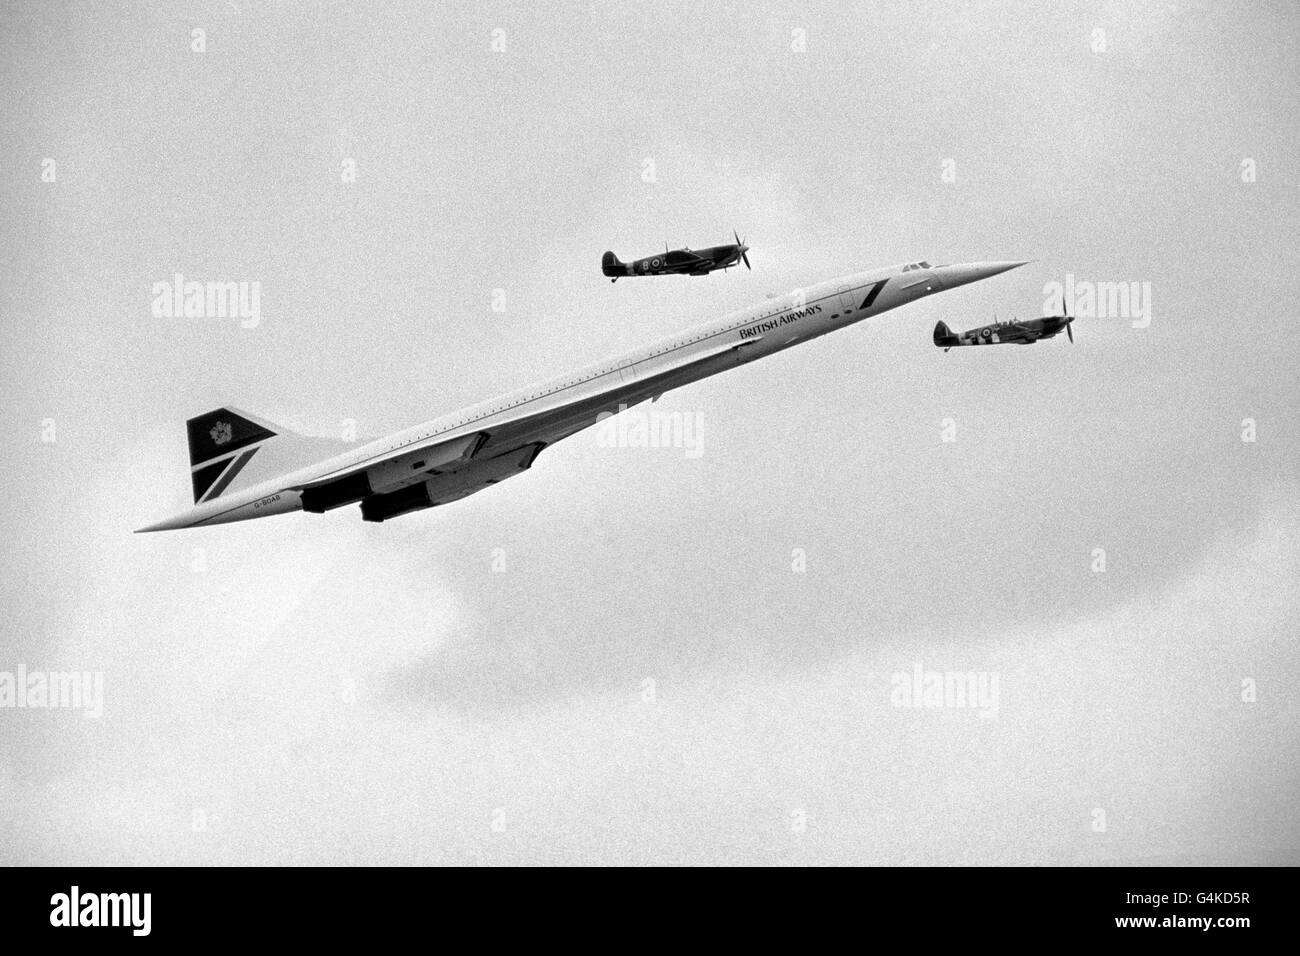 A British Airways Concorde is shadowed by two Second World War spitfires as it arrives to make passes over the Biggin Hill Air Show. Stock Photo